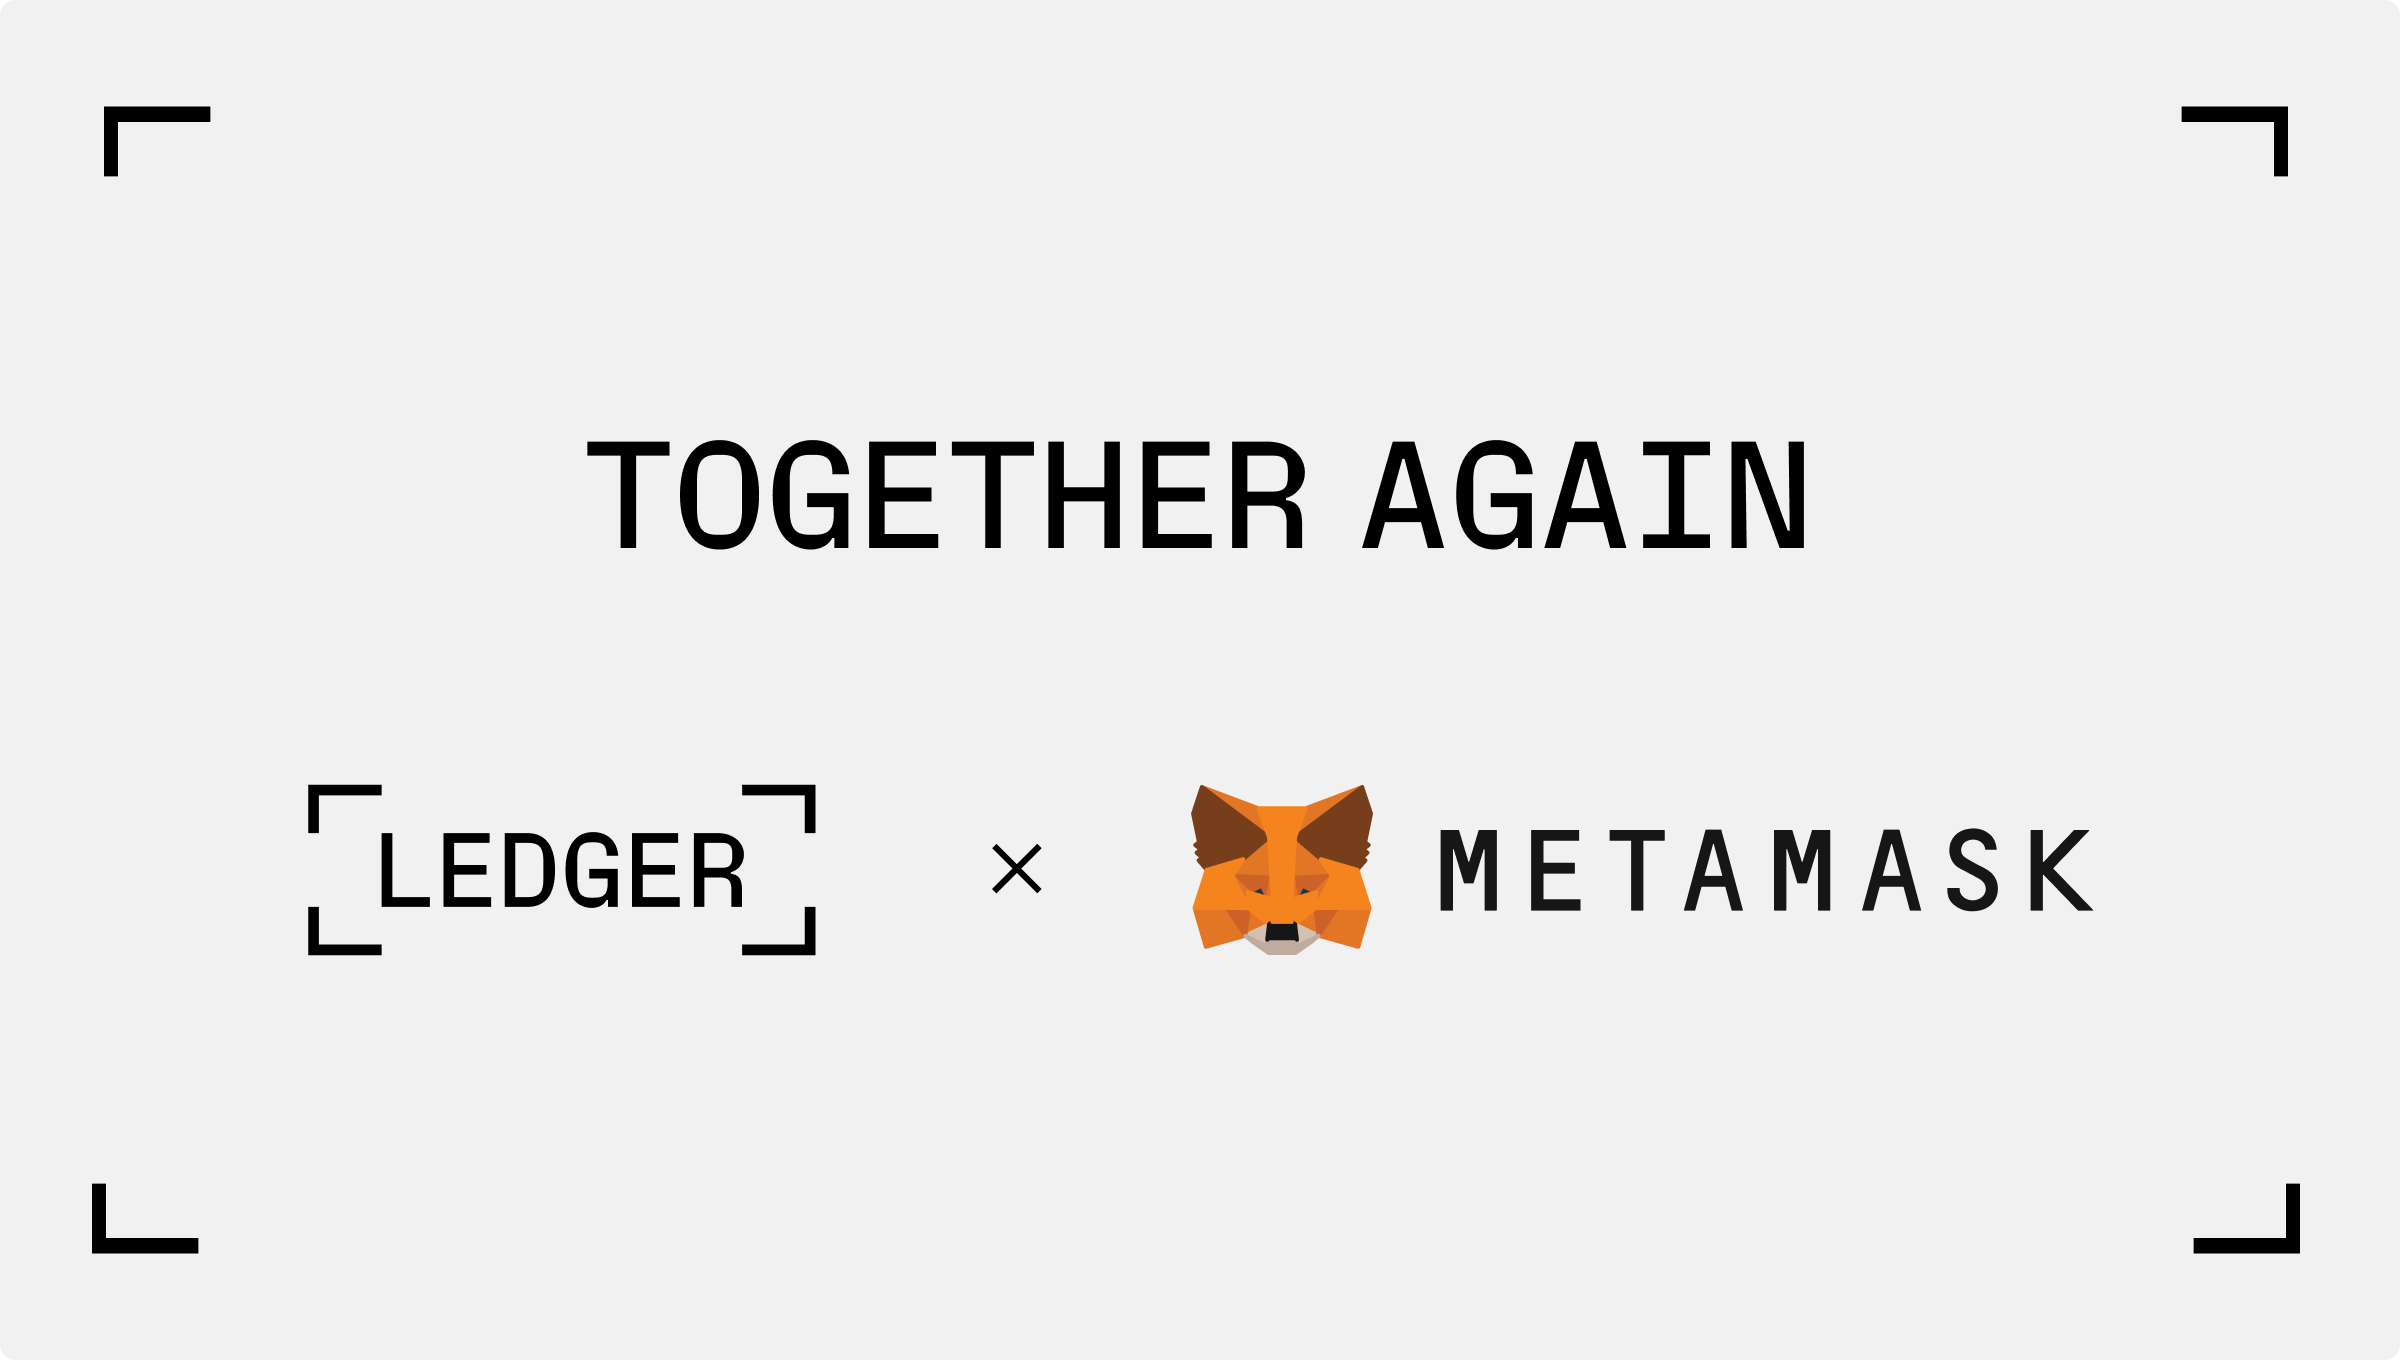 MetaMask and Ledger Integration Fixed! + New Partnership between MetaMask and Ledger to ensure ease-of-use and security for our shared customers